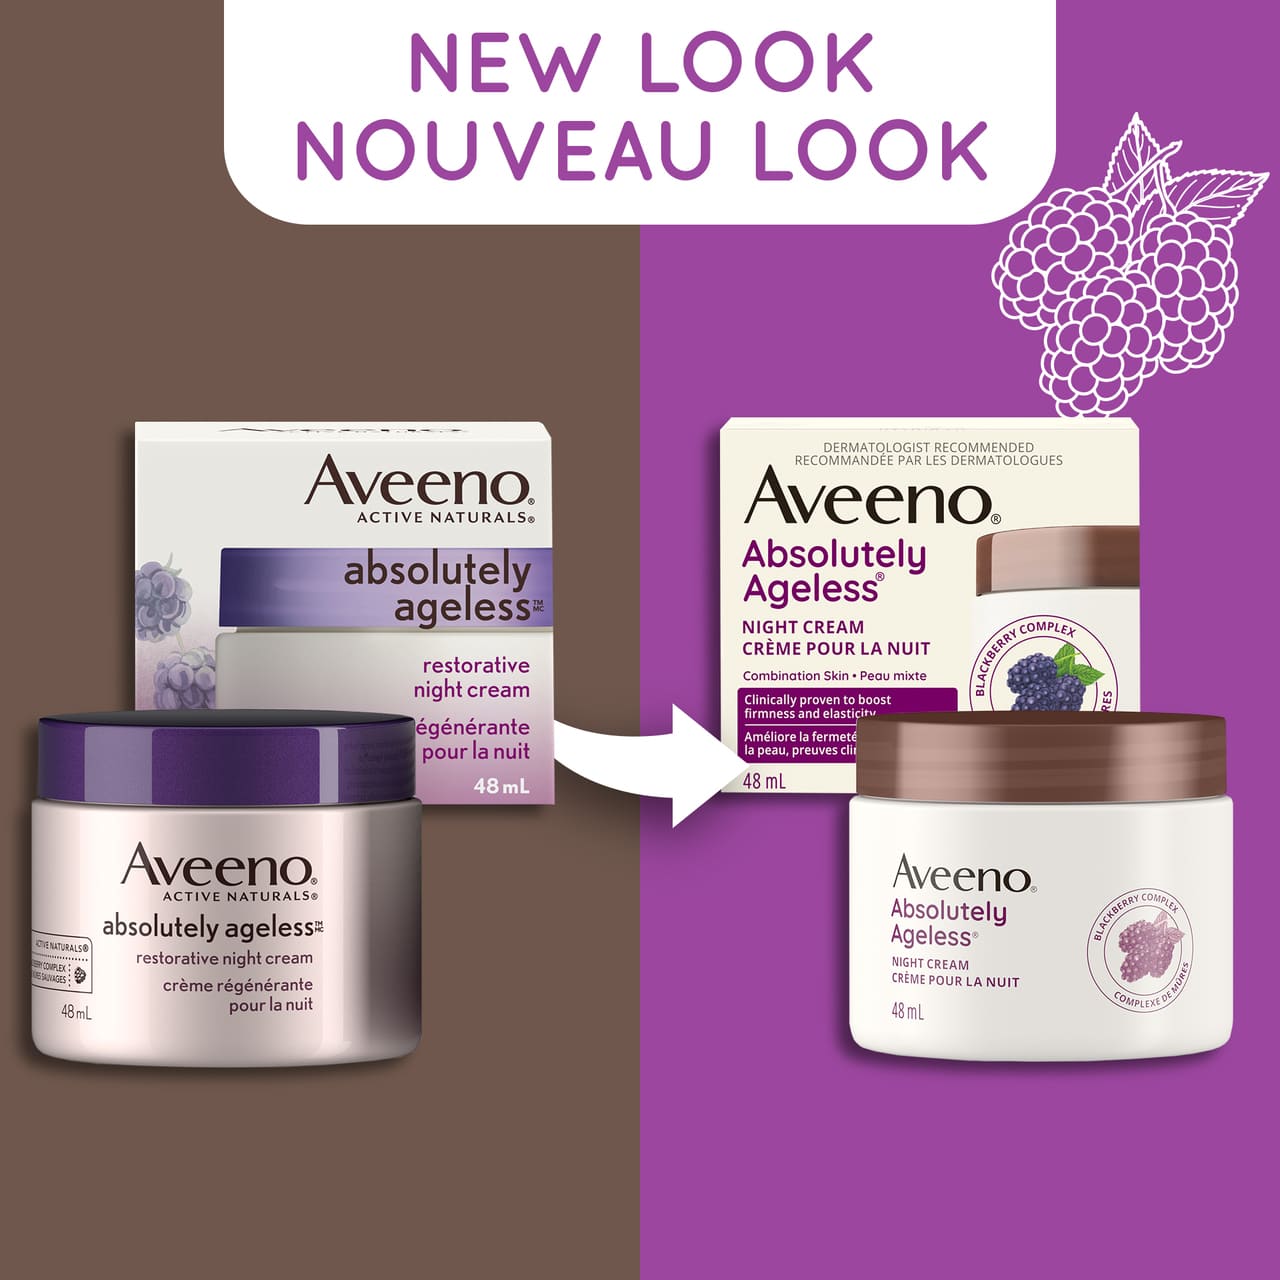 New and old packaging of AVEENO® Absolutely Ageless Restorative Night Cream, 48 mL with a text stating 'New Look'